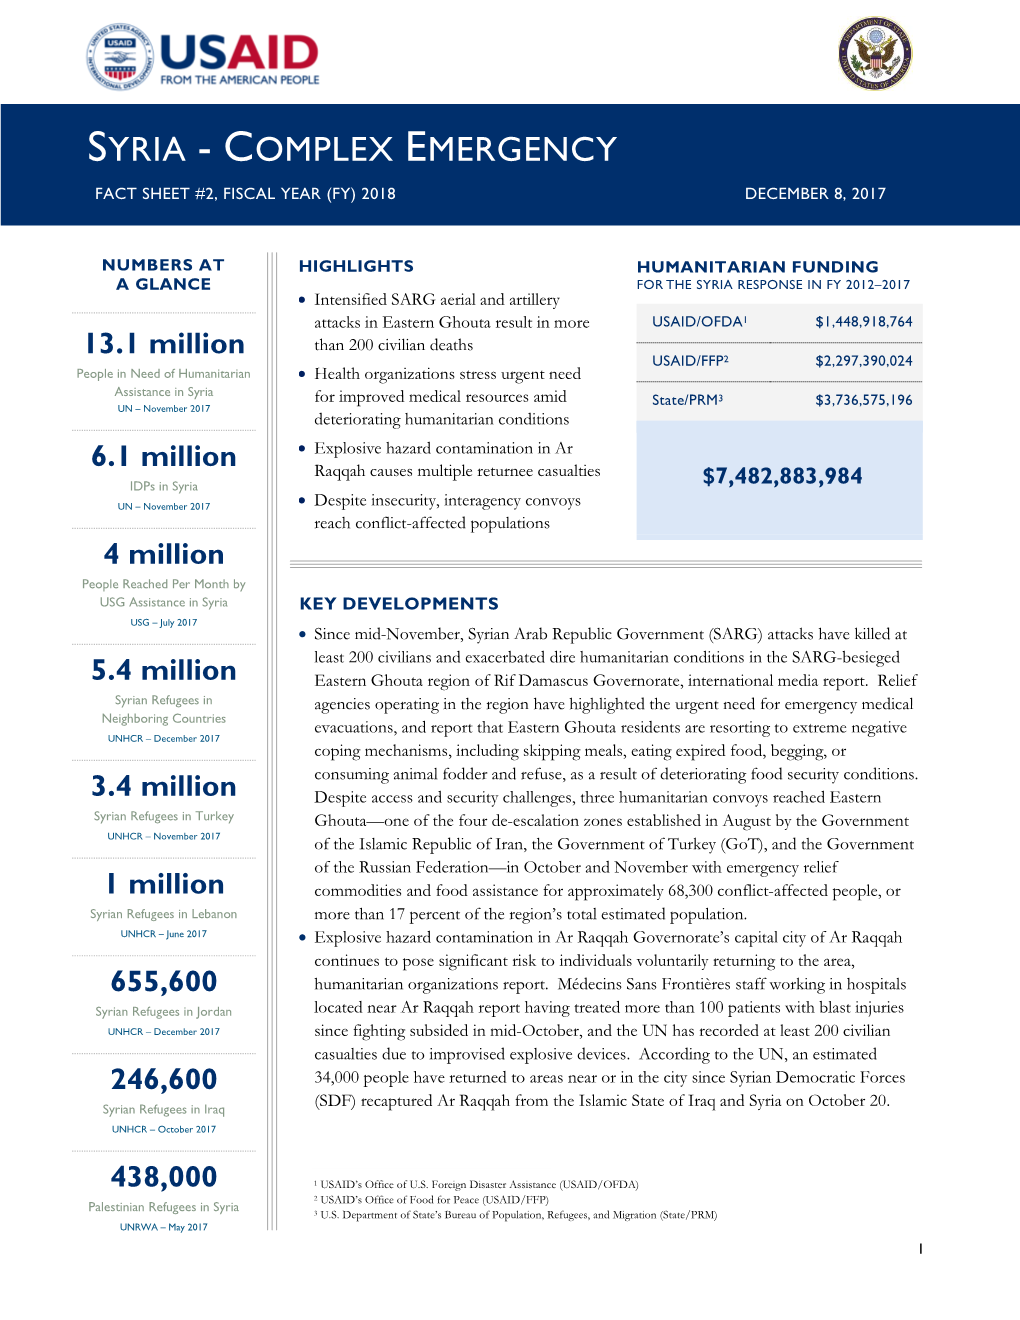 Syria - Complex Emergency Fact Sheet #2, Fiscal Year (Fy) 2018 December 8, 2017